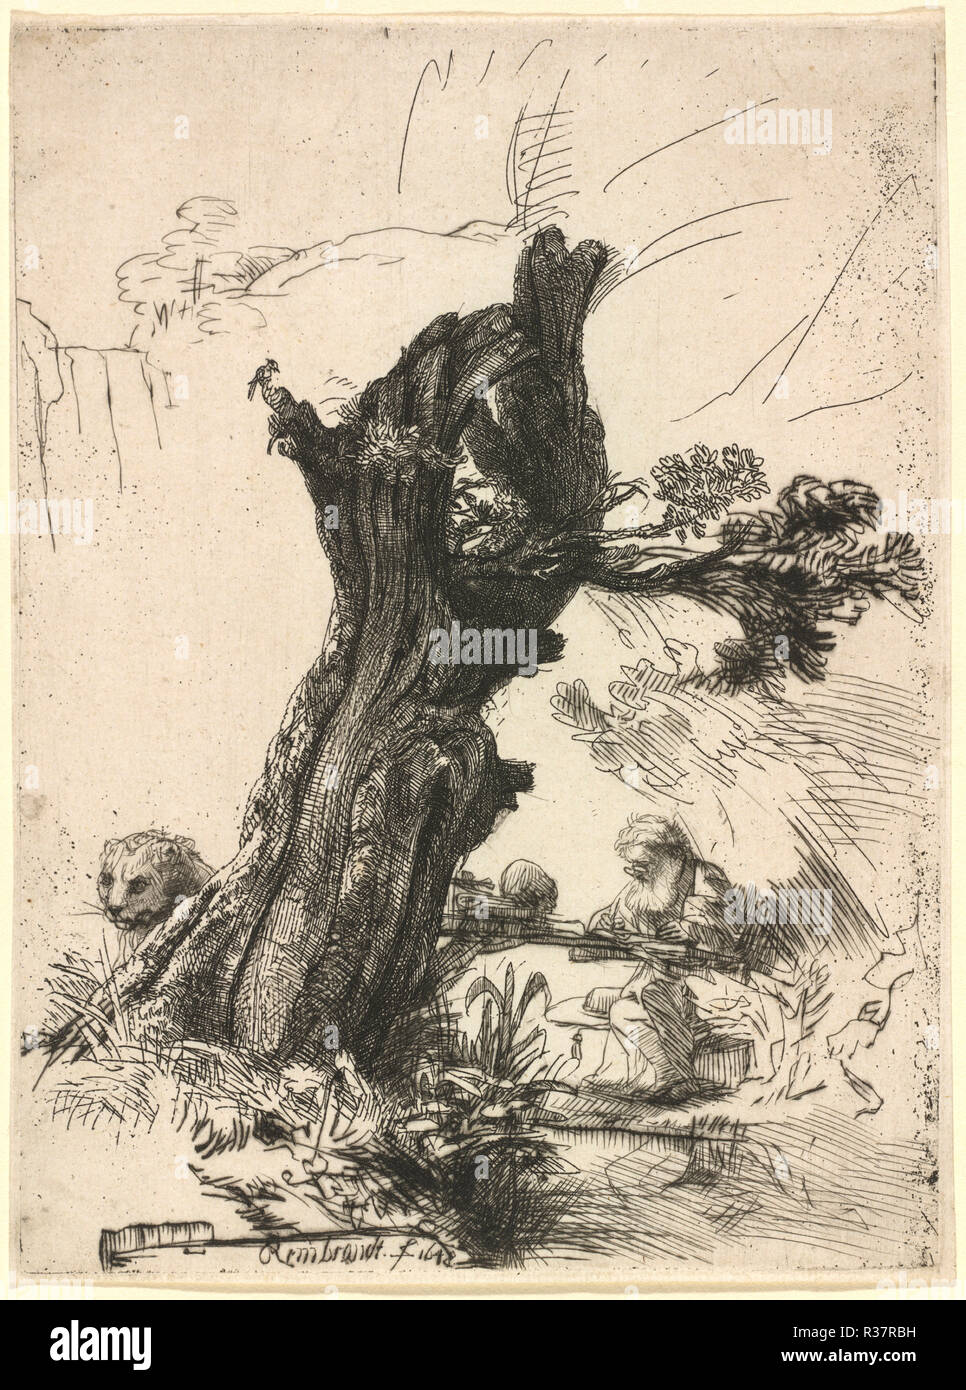 Saint Jerome beside a Pollard Willow. Dated: 1648. Dimensions: plate: 17.8 x 13.2 cm (7 x 5 3/16 in.)  sheet: 18.1 x 13.6 cm (7 1/8 x 5 3/8 in.). Medium: etching and drypoint. Museum: National Gallery of Art, Washington DC. Author: REMBRANDT, HARMENSZOON VAN RIJN. Rembrandt (Rembrandt van Rijn). Stock Photo